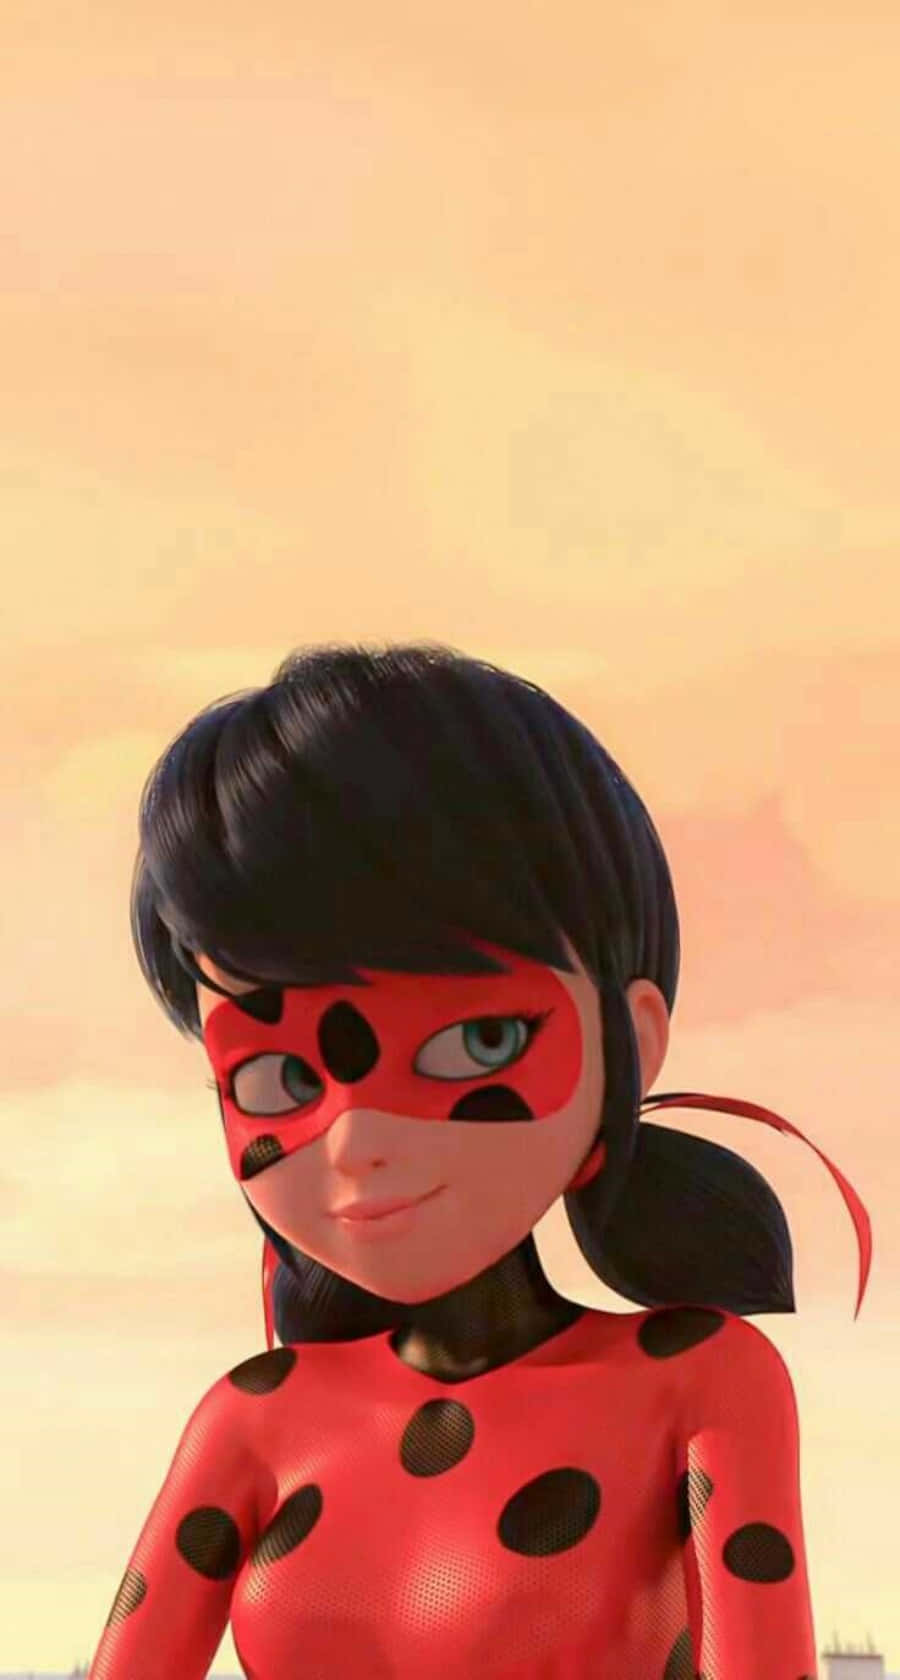 adriano martin share pics of ladybug from miraculous photos